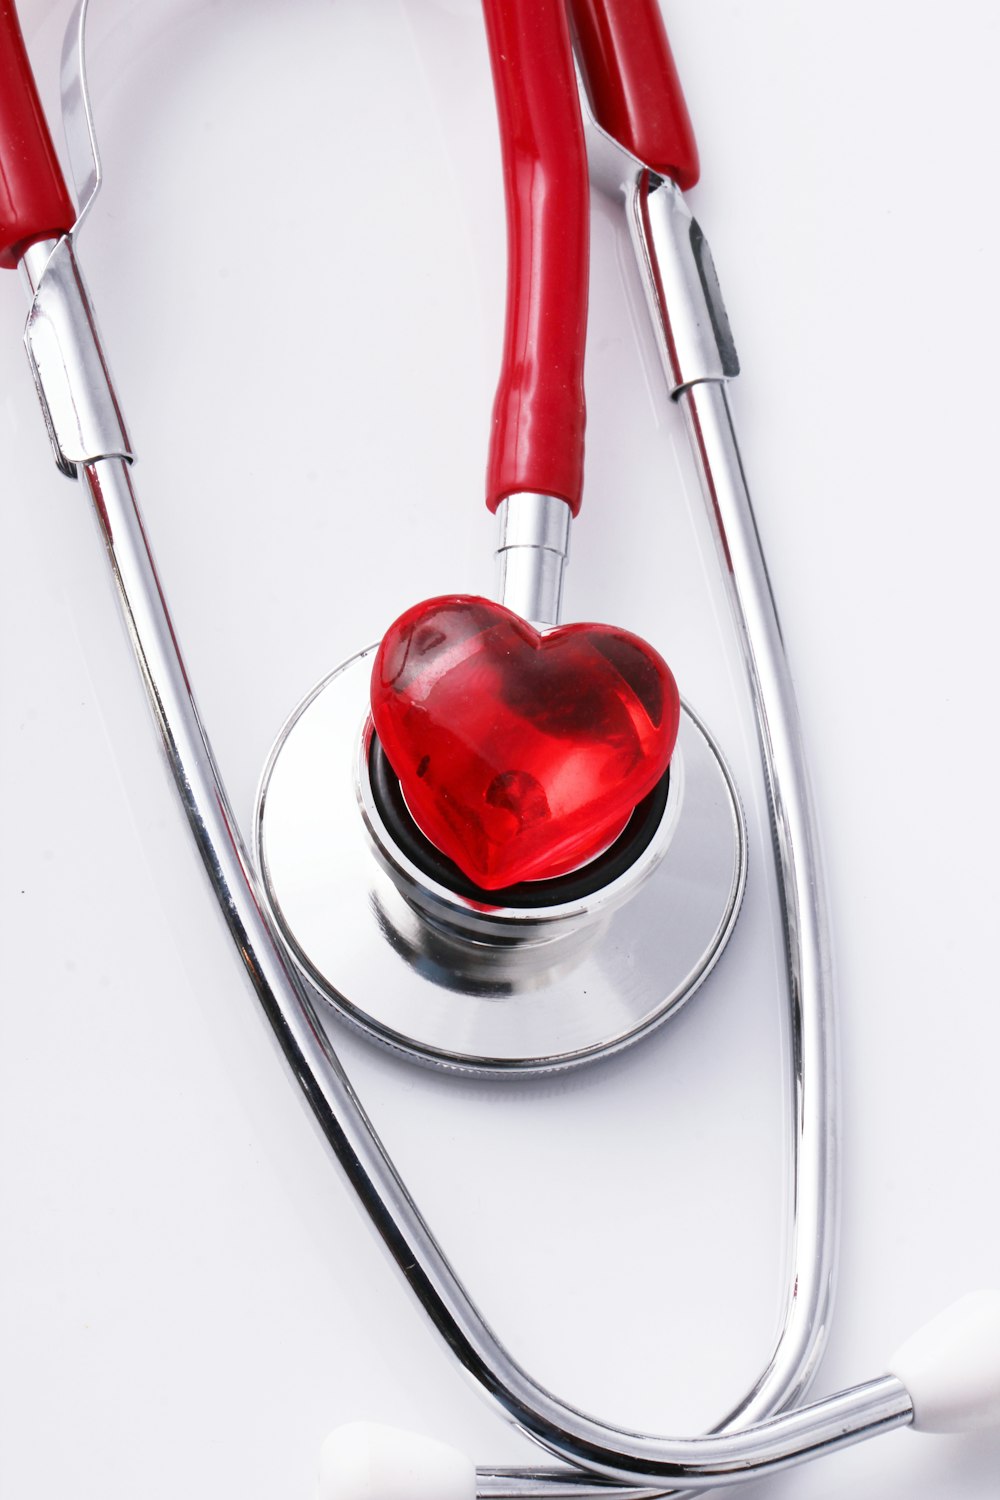 a stethoscope with a red heart on it